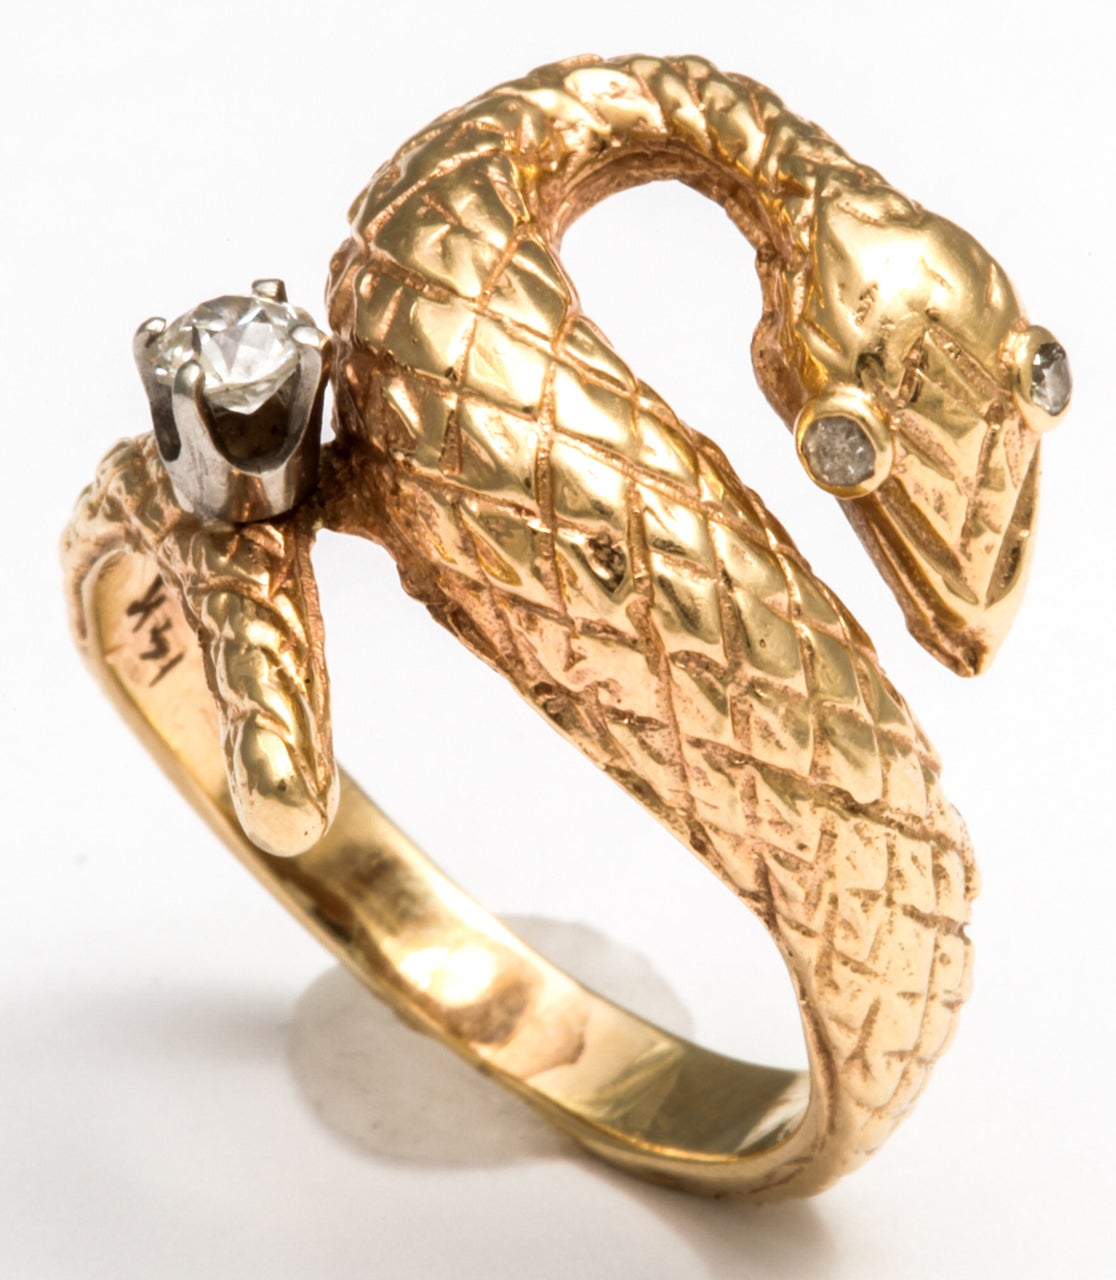 20th century 18k gold snake ring, well articulated with .25ct European diamond, and small bezel sest diamonds in the eyes.